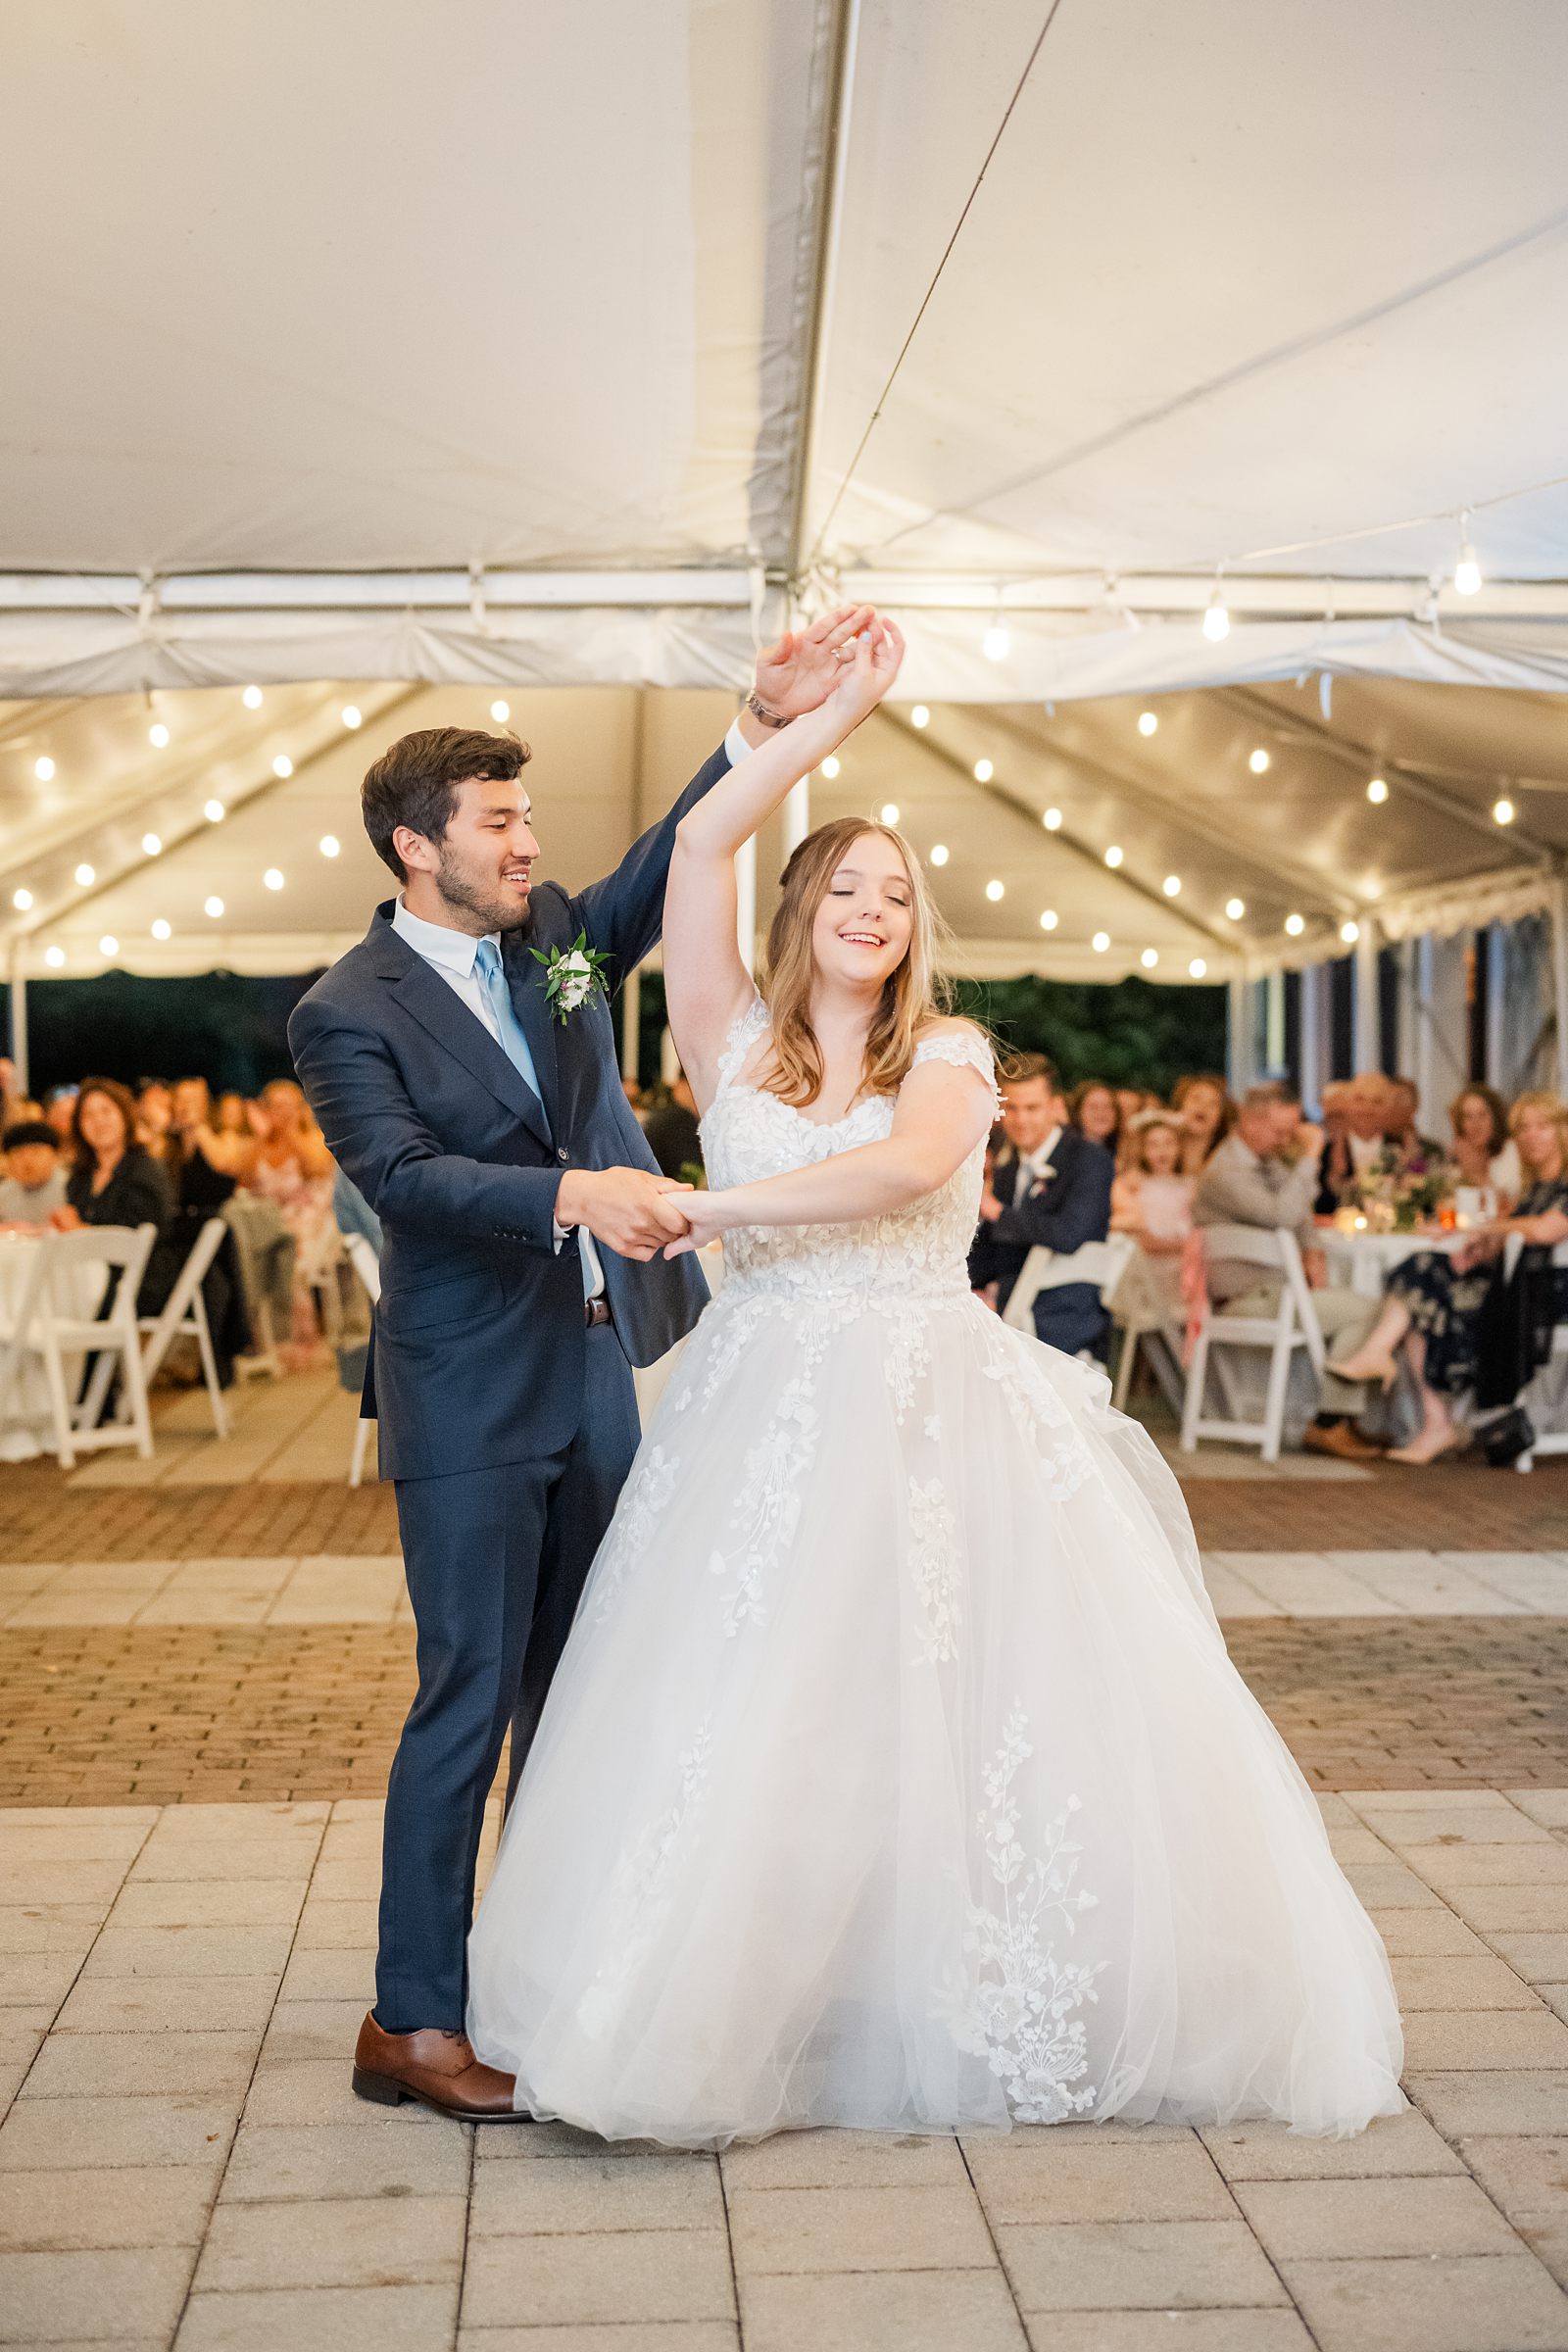 Bride and Groom Dancing at Fall Lewis Ginter Wedding Reception